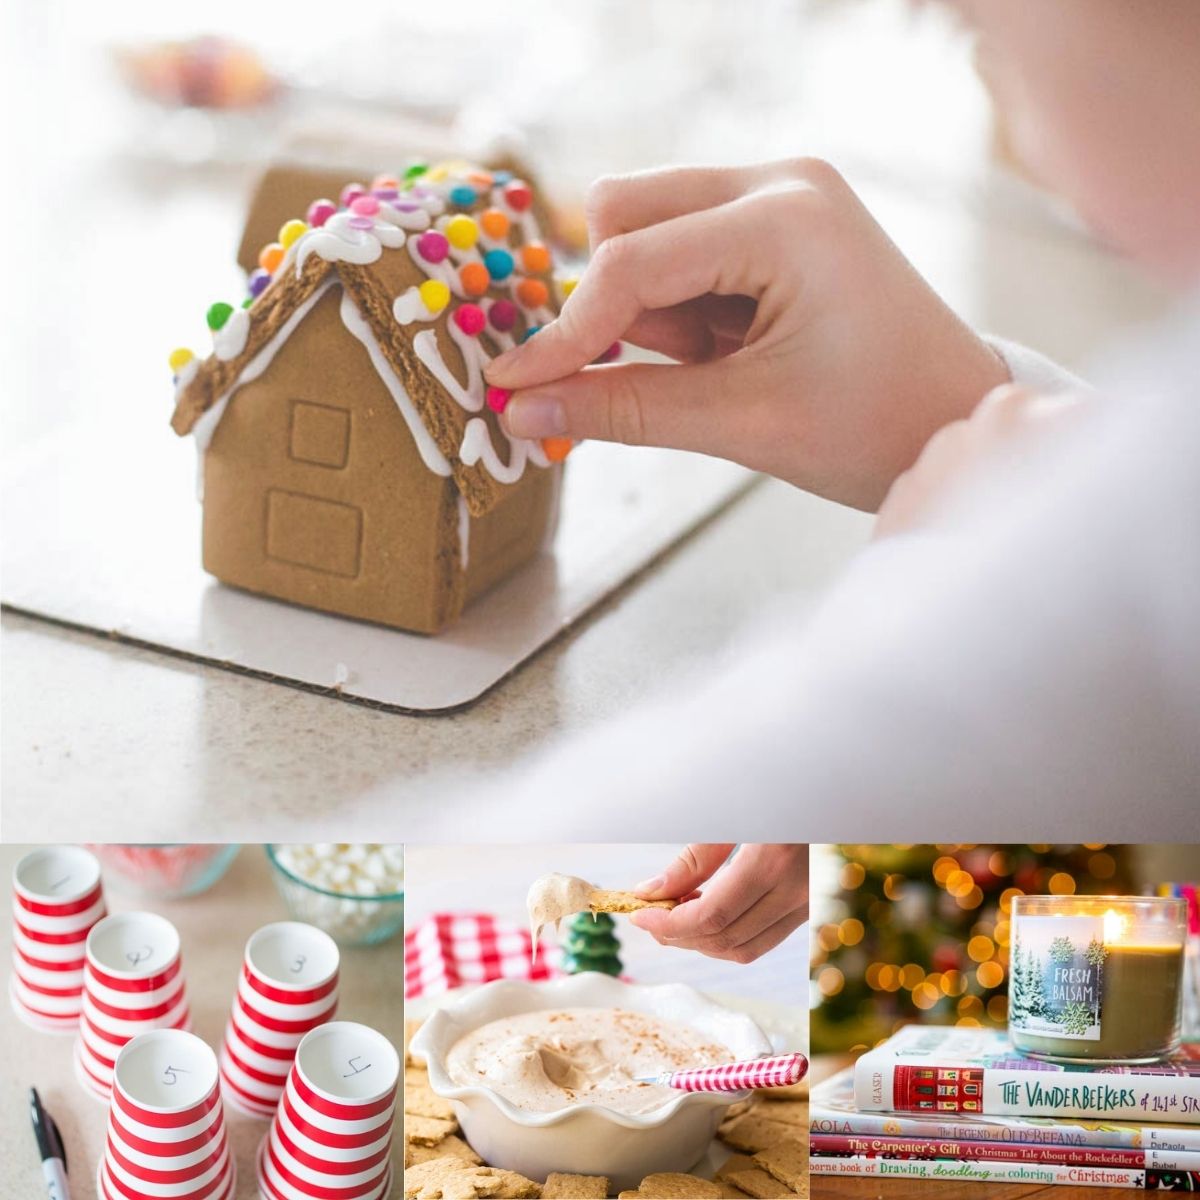 A young girl decorates a gingerbread house, the other photos show the fun ideas to do with families for Christmas Eve.